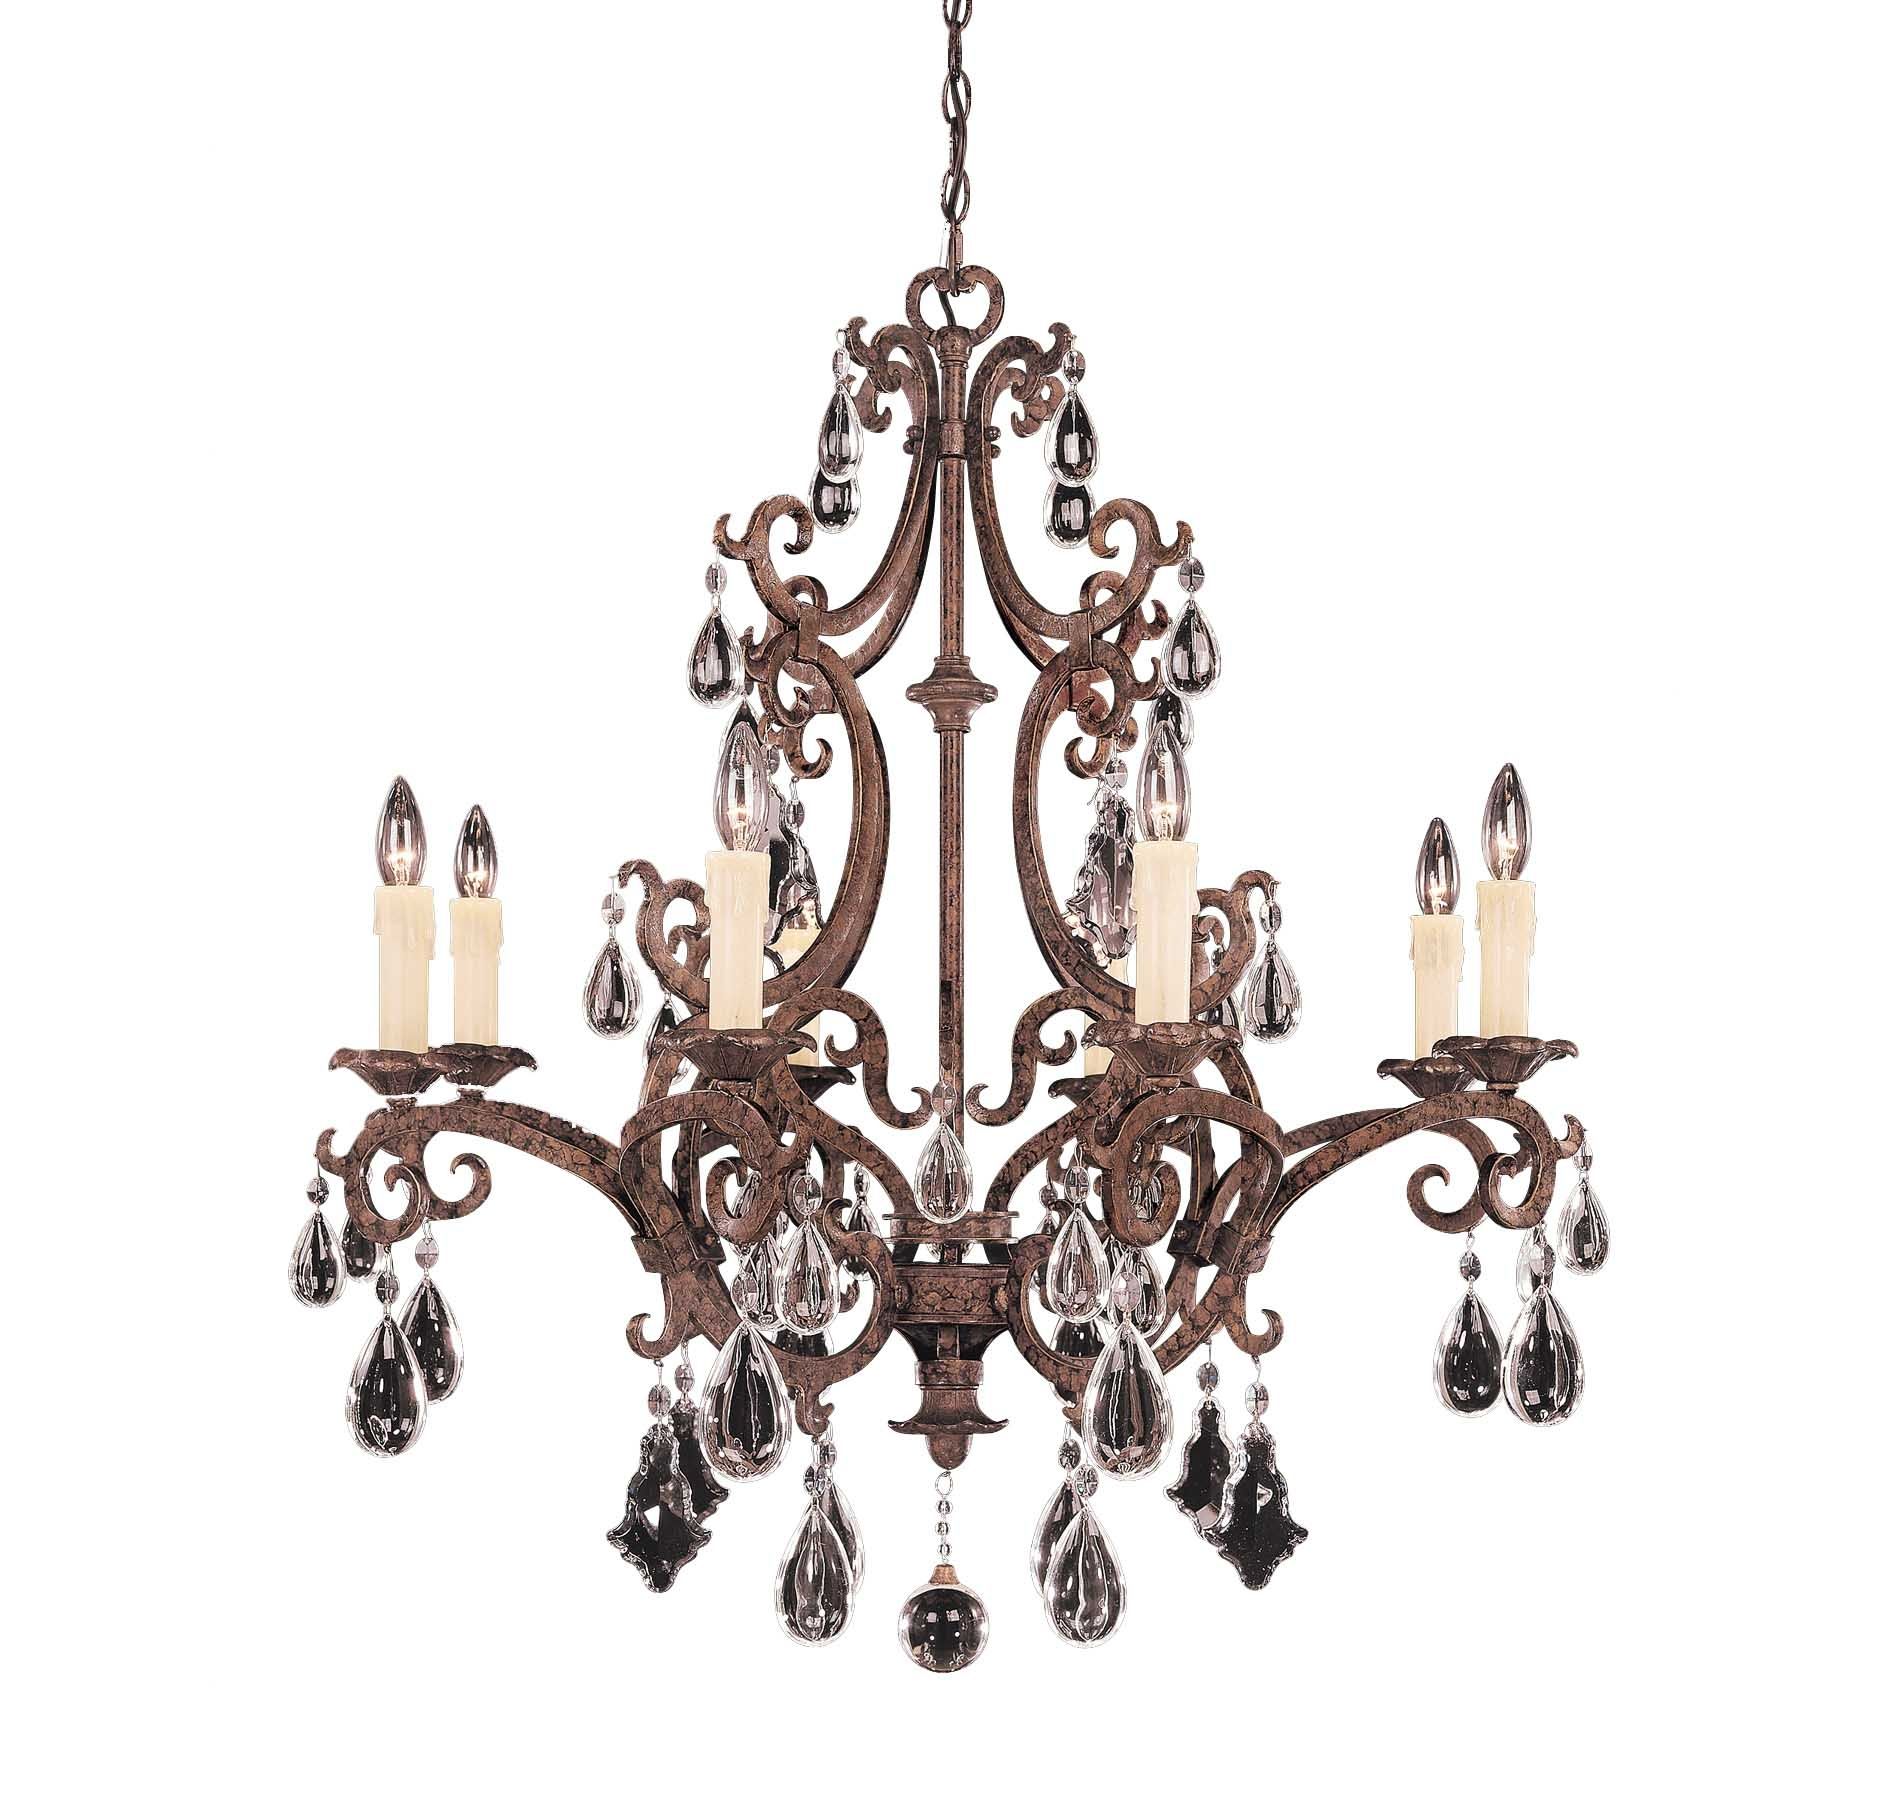 The Fine Fabric Of Space And Taste Of Crystal Chandeliers Blog Pertaining To Traditional Chandeliers (View 6 of 12)